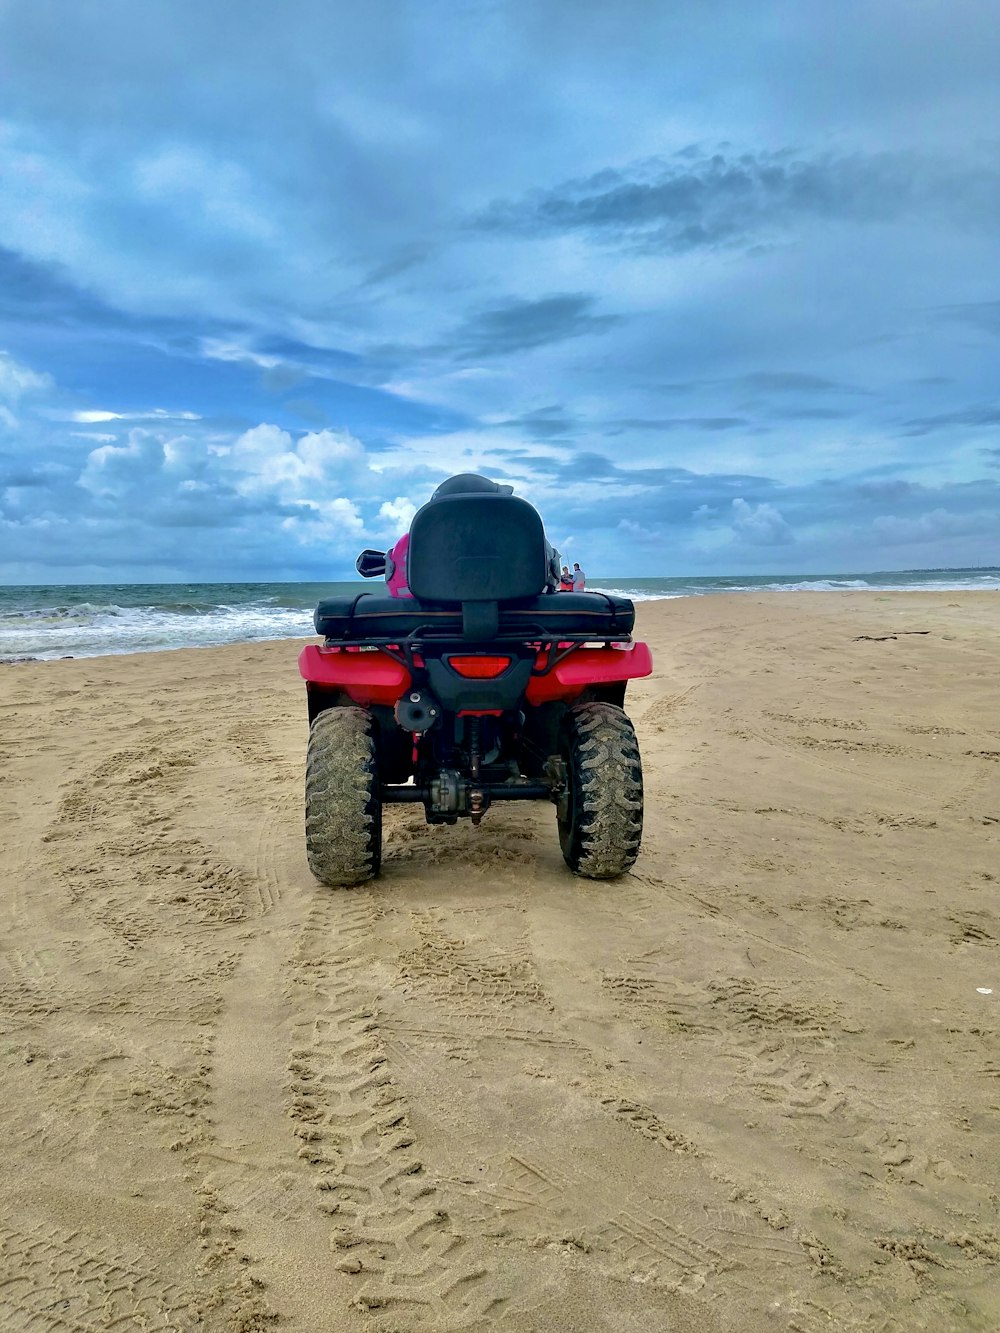 a red and black vehicle on a sandy beach